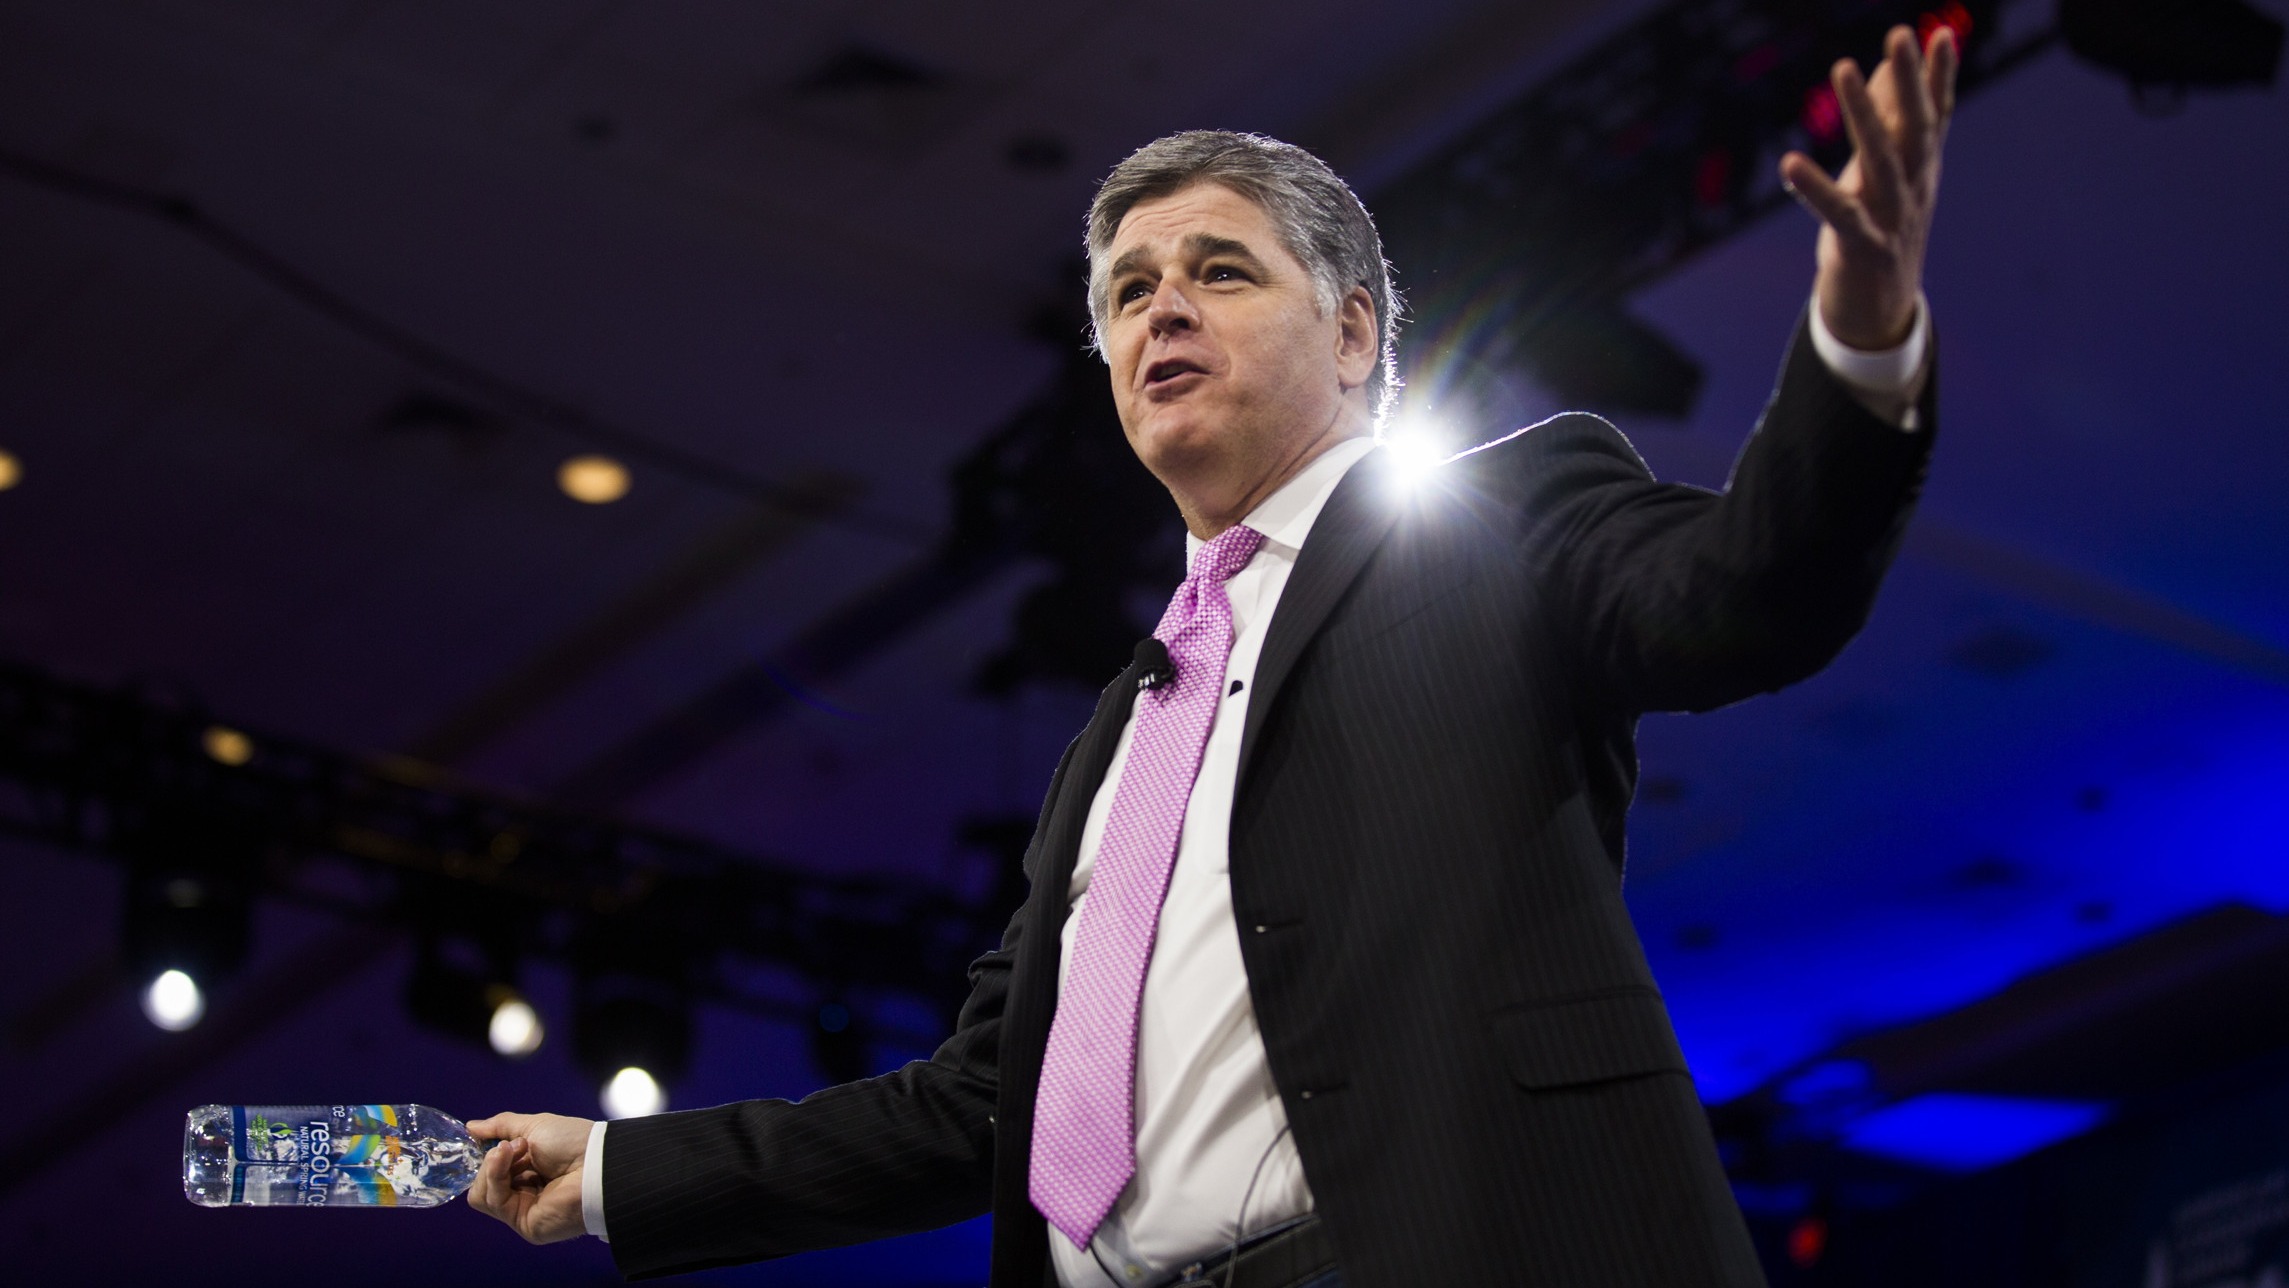 Sean Hannity's journalistic pedigree tested in Dominion lawsuit against Fox  News | Financial Times